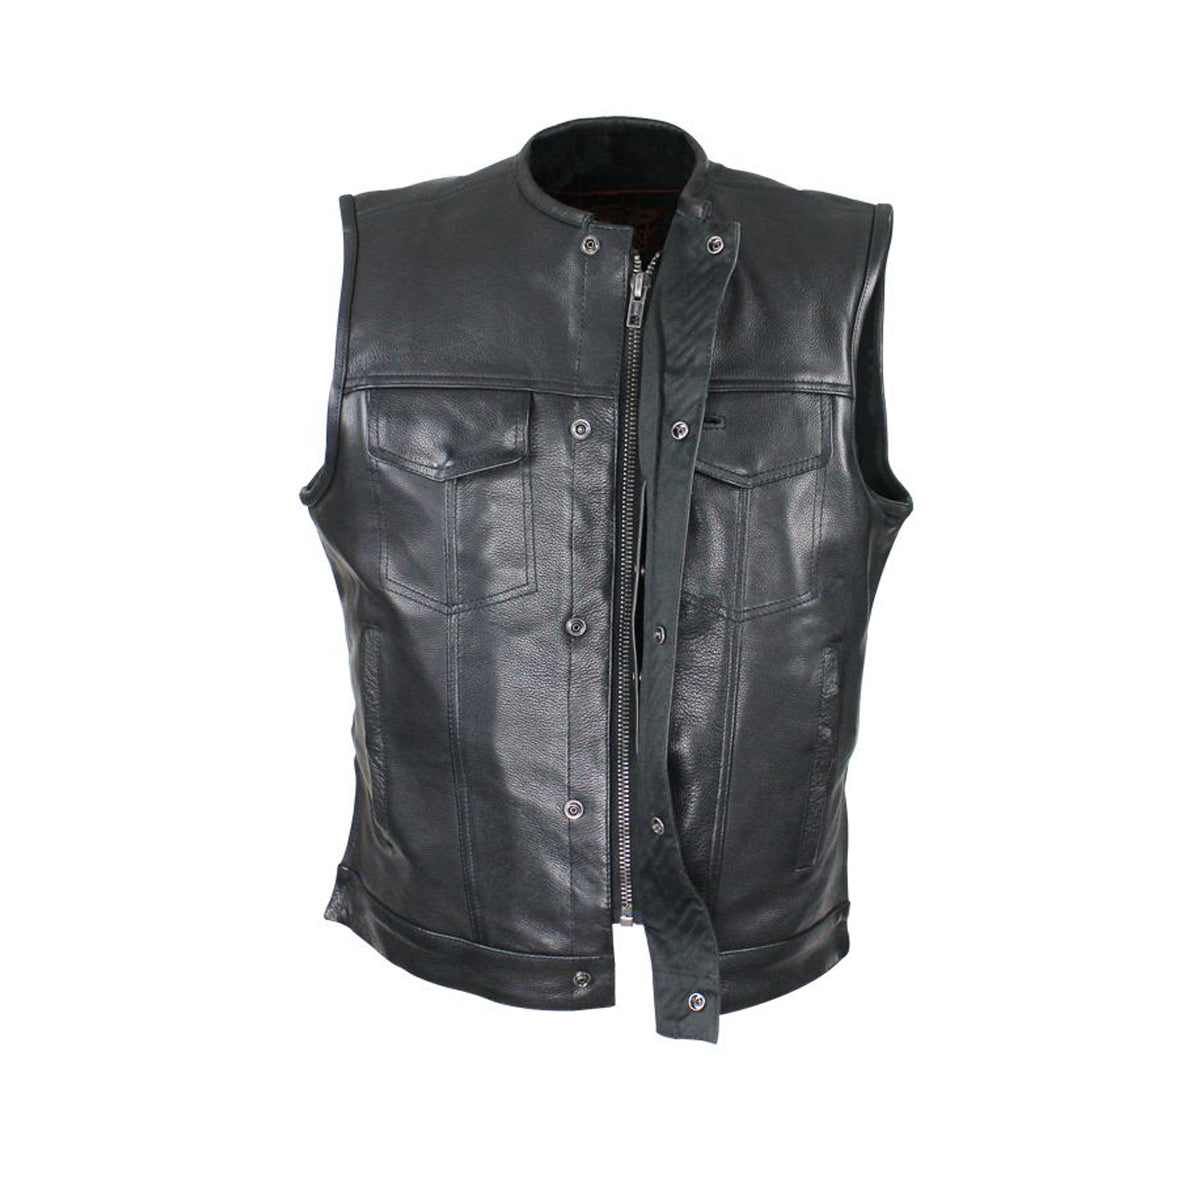 Naked Cowhide Leather Vest W/ Gun Pockets By Milwaukee Riders